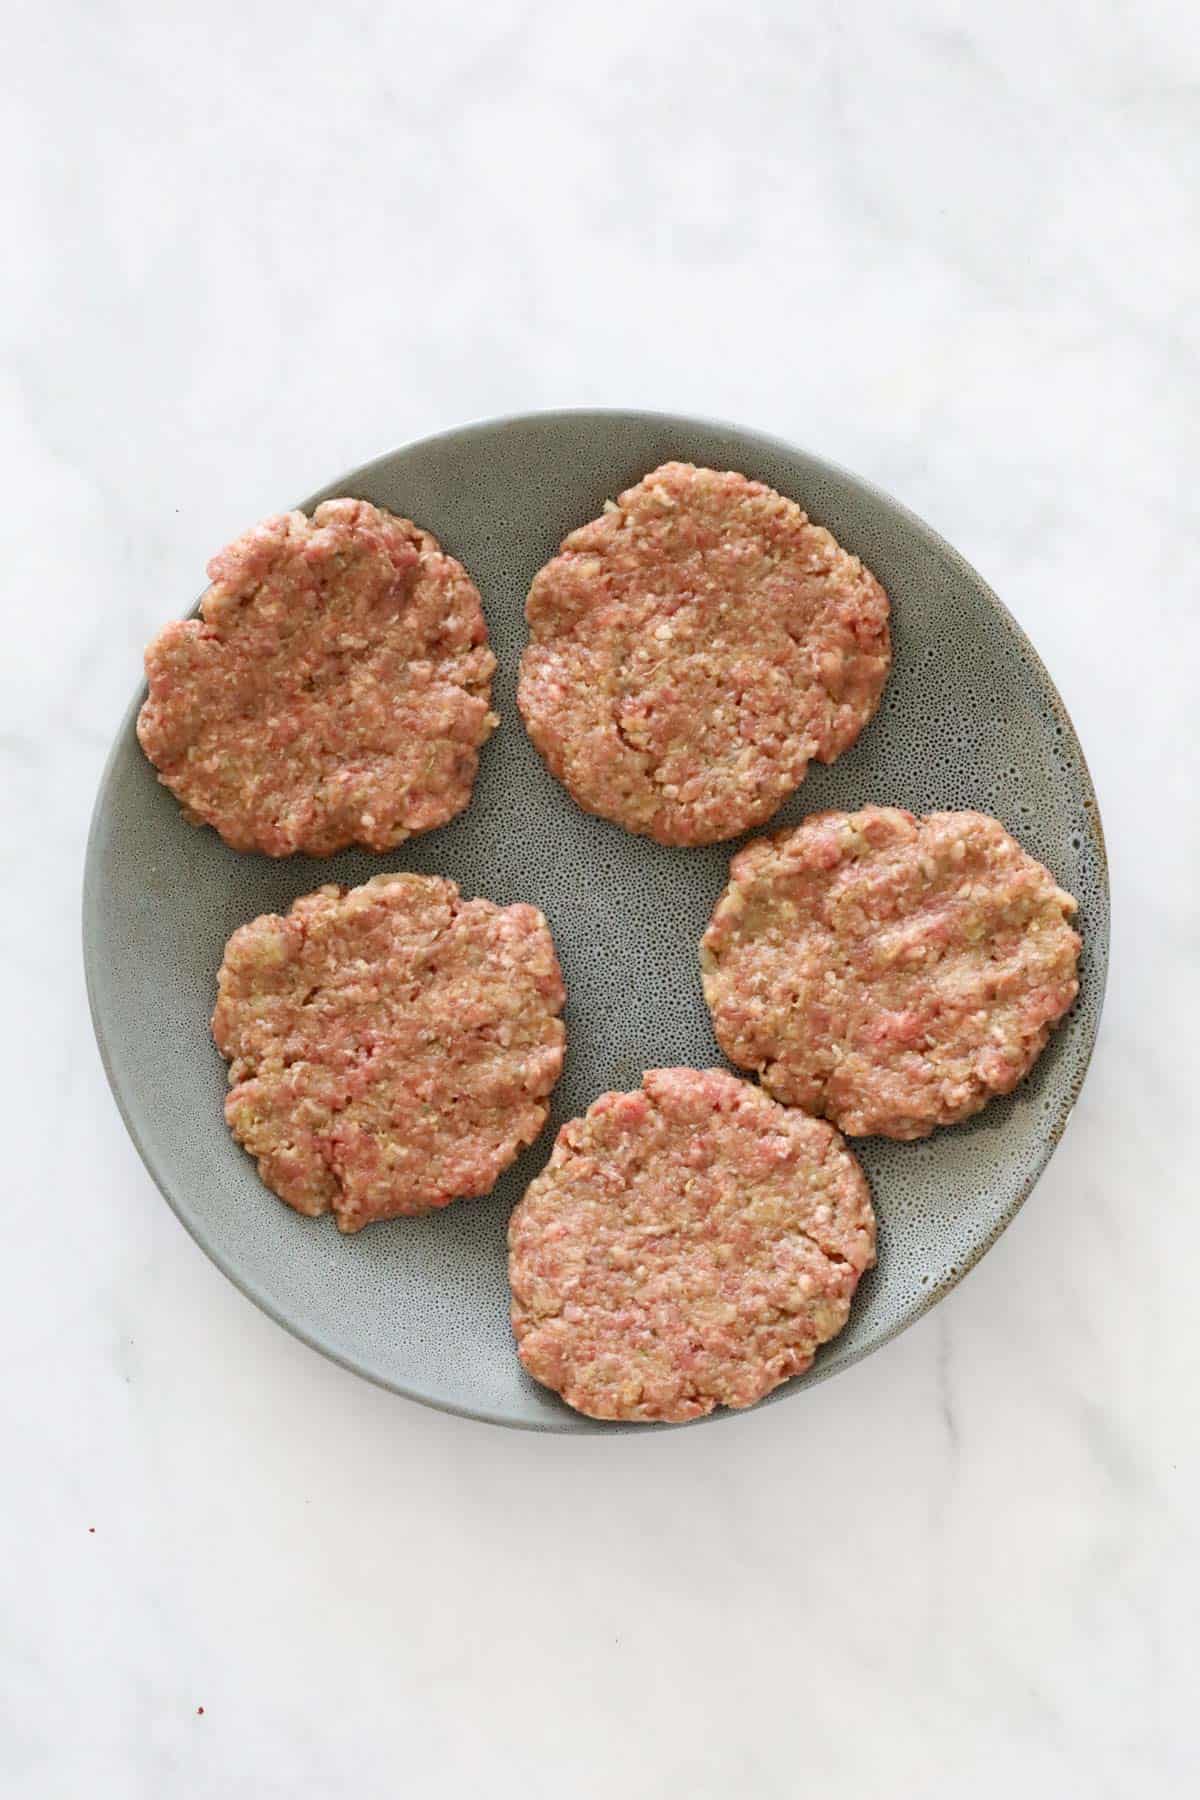 5 formed patties on a plate.